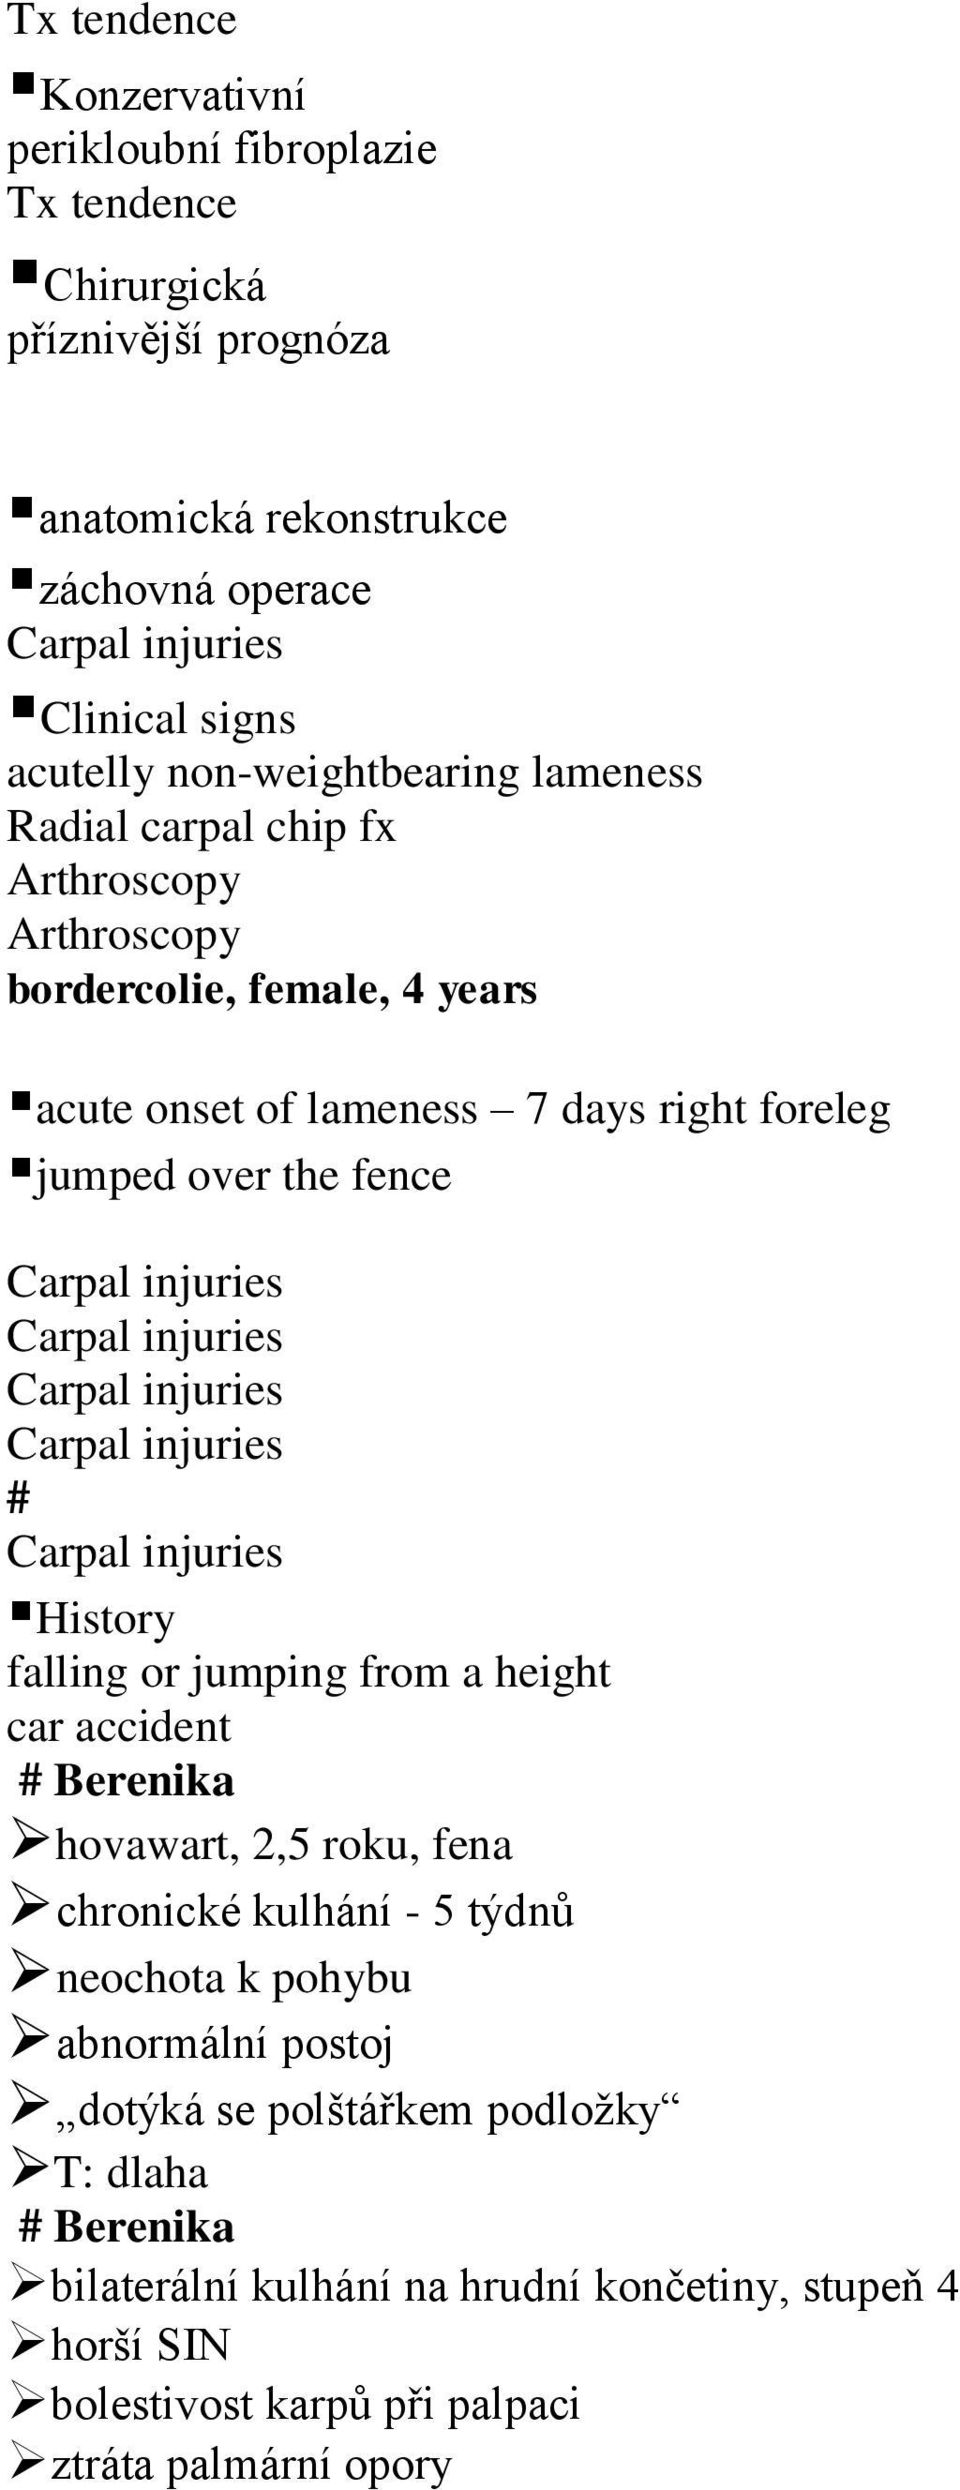 Carpal injuries Carpal injuries Carpal injuries # Carpal injuries History falling or jumping from a height car accident hovawart, 2,5 roku, fena chronické kulhání - 5 týdnů